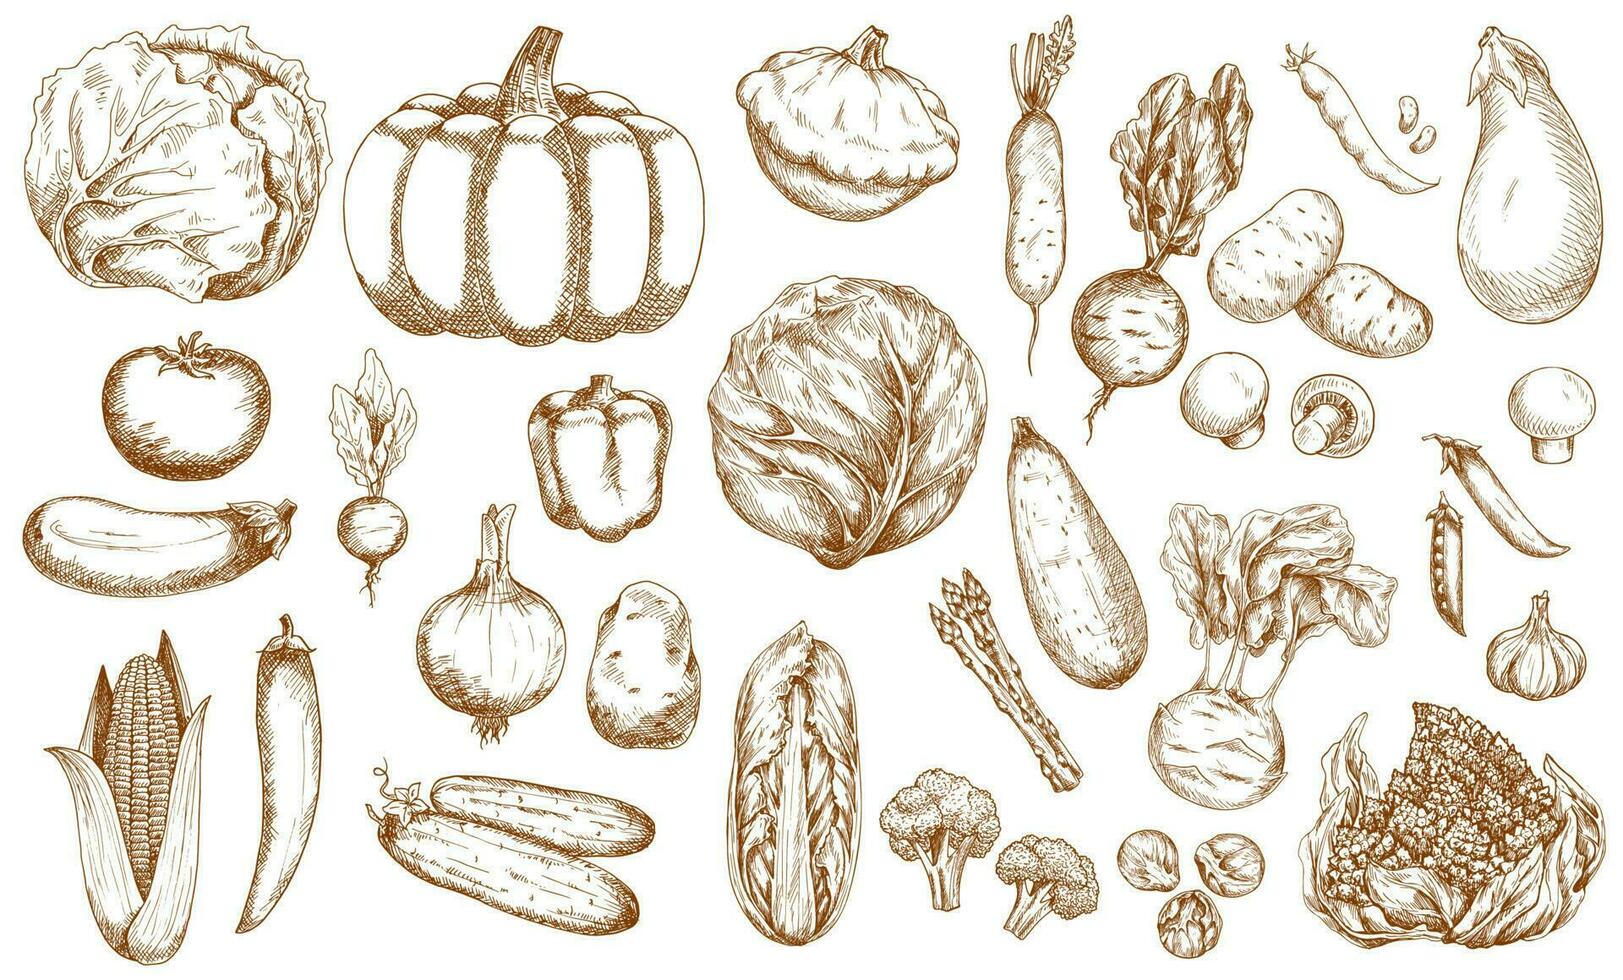 Farm vegetable, greenery and veggies sketches set vector